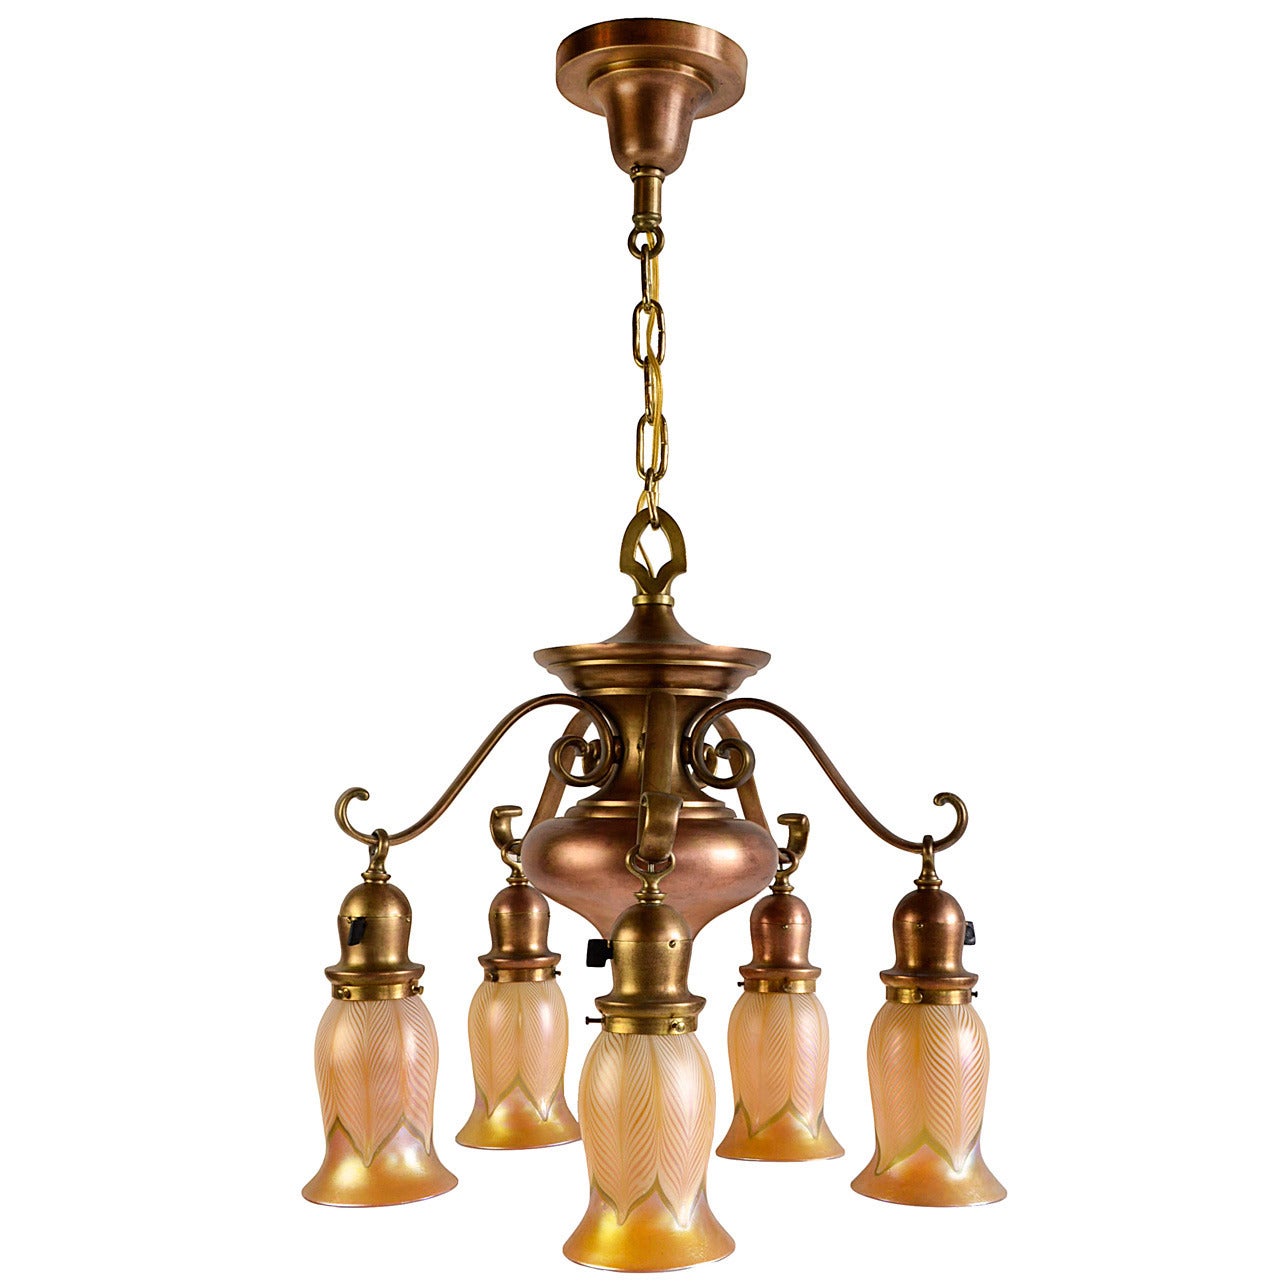 Cast Brass Five Arm Chandelier with Signed Quezal Pulled Feather Shades